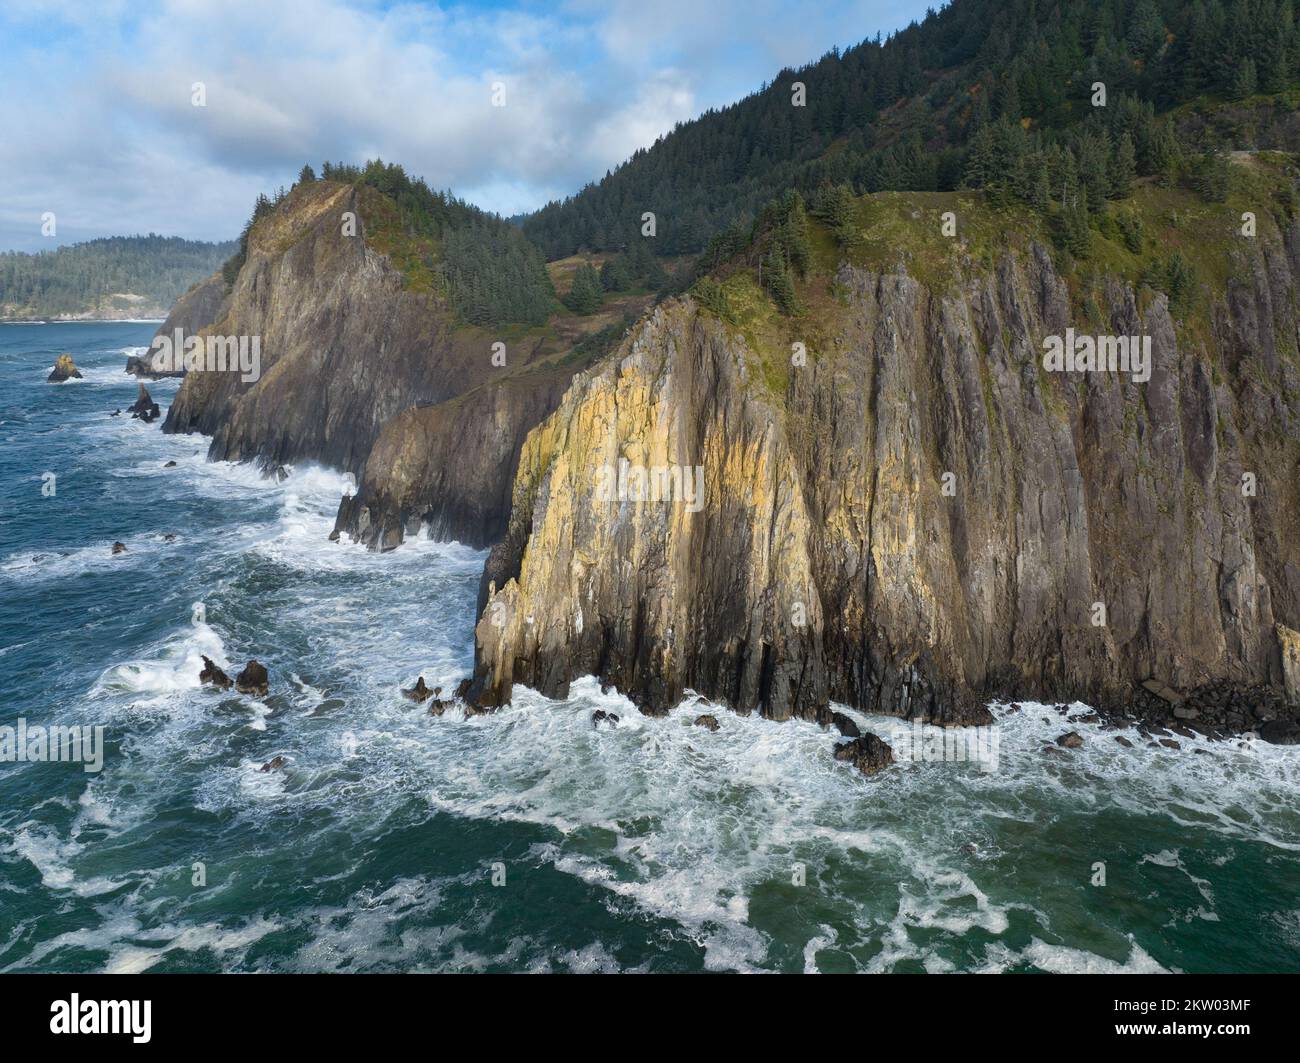 The cold Pacific Ocean washes against the rugged coastline of northern Oregon. This Pacific Northwest is known for its spectacular outdoor scenery. Stock Photo